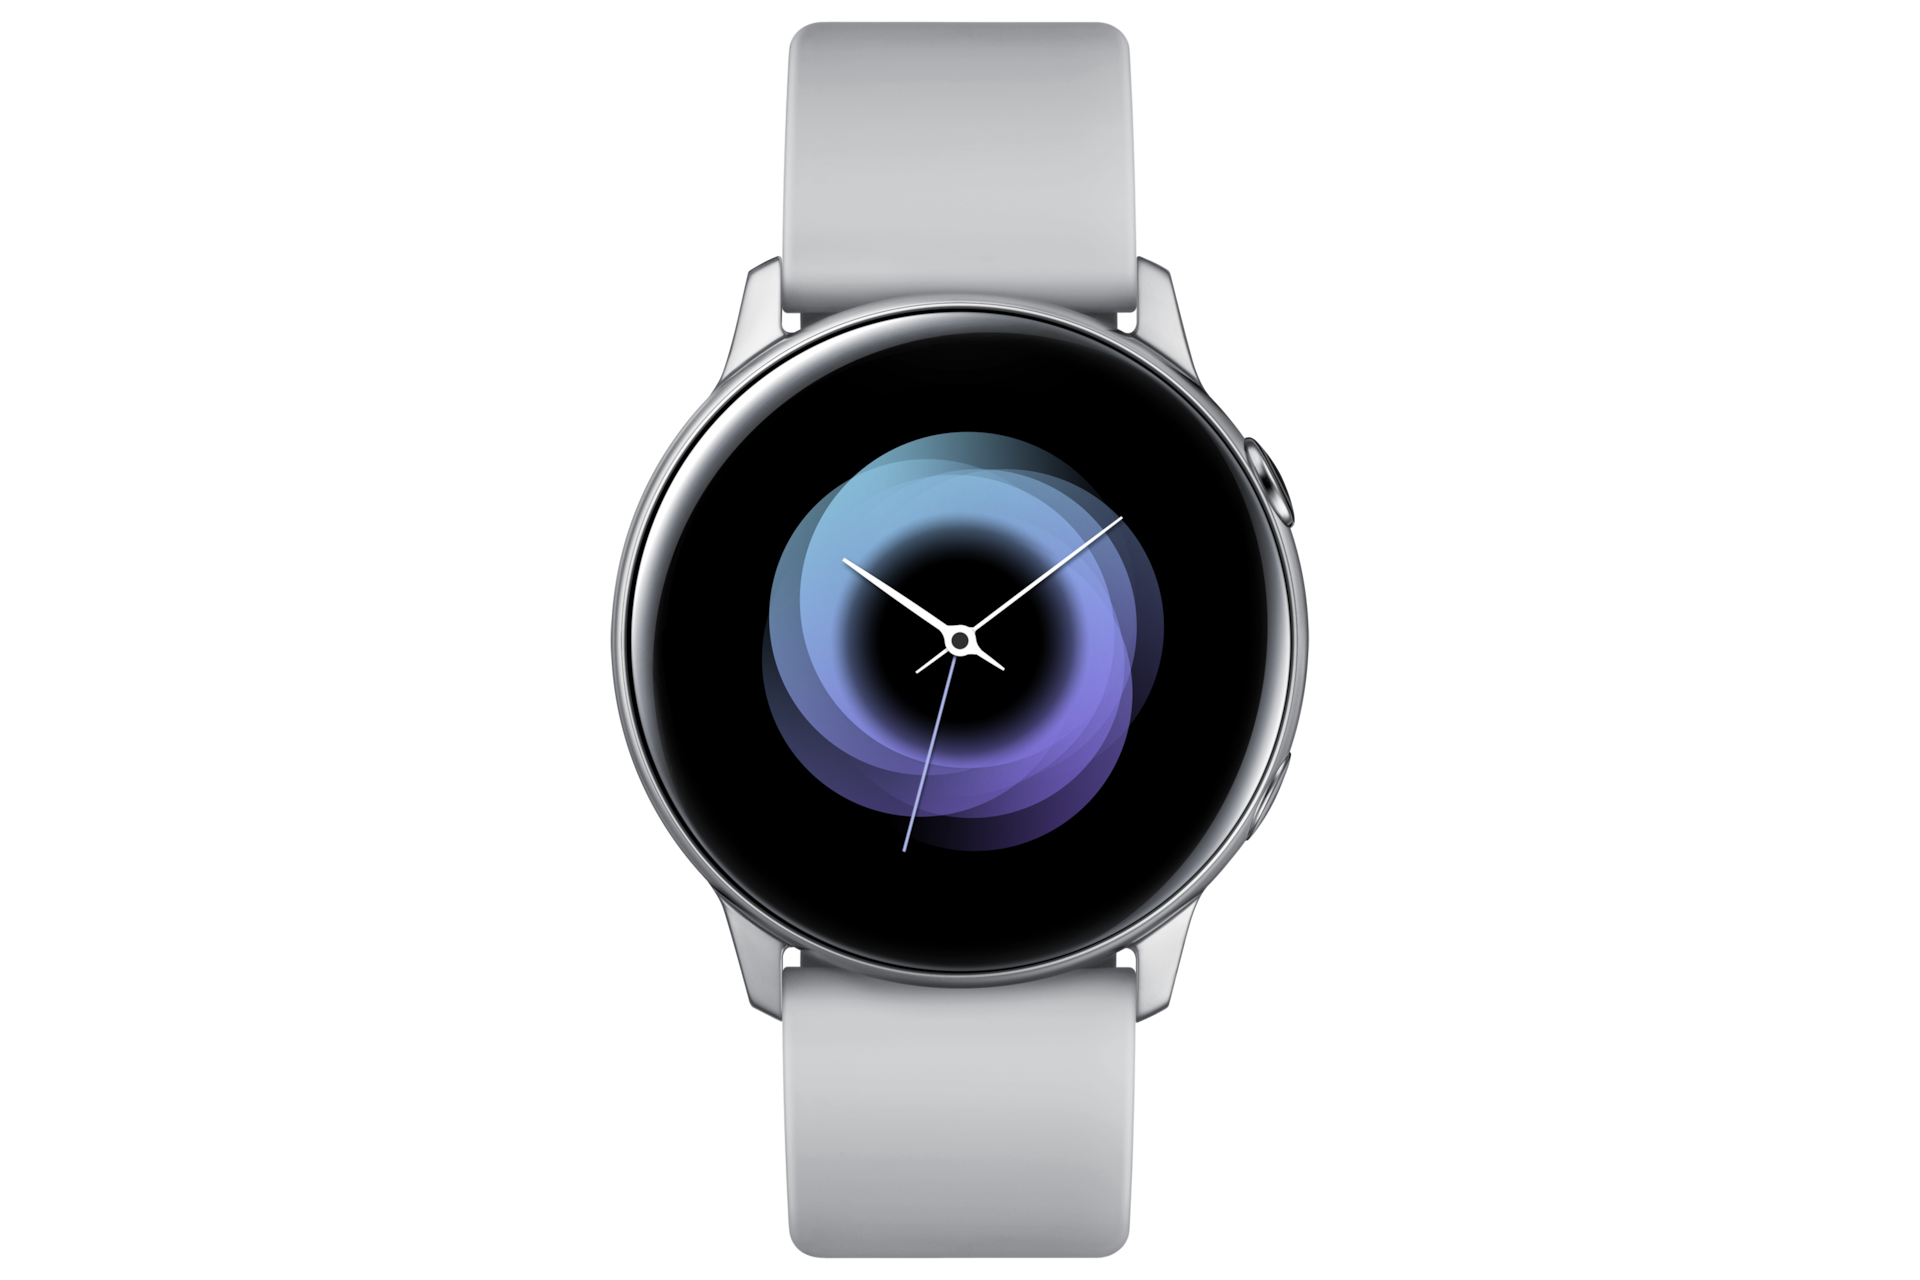 samsung galaxy watch active full specification